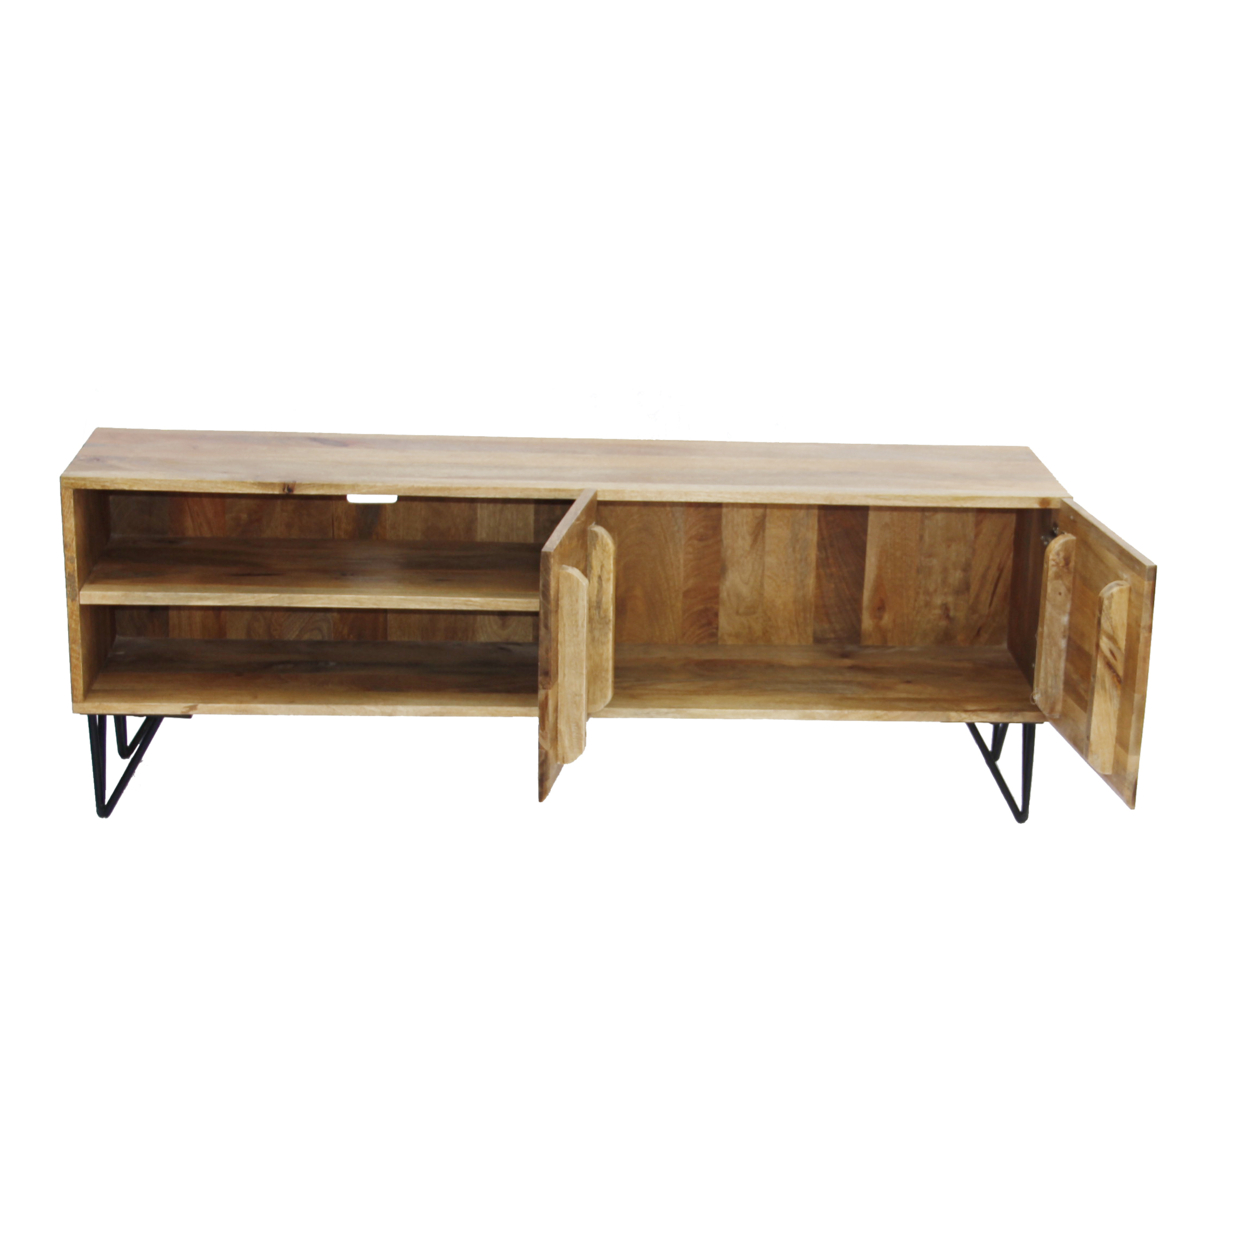 Industrial Style Mango Wood And Metal Tv Stand With Storage Cabinet, Brown- Saltoro Sherpi